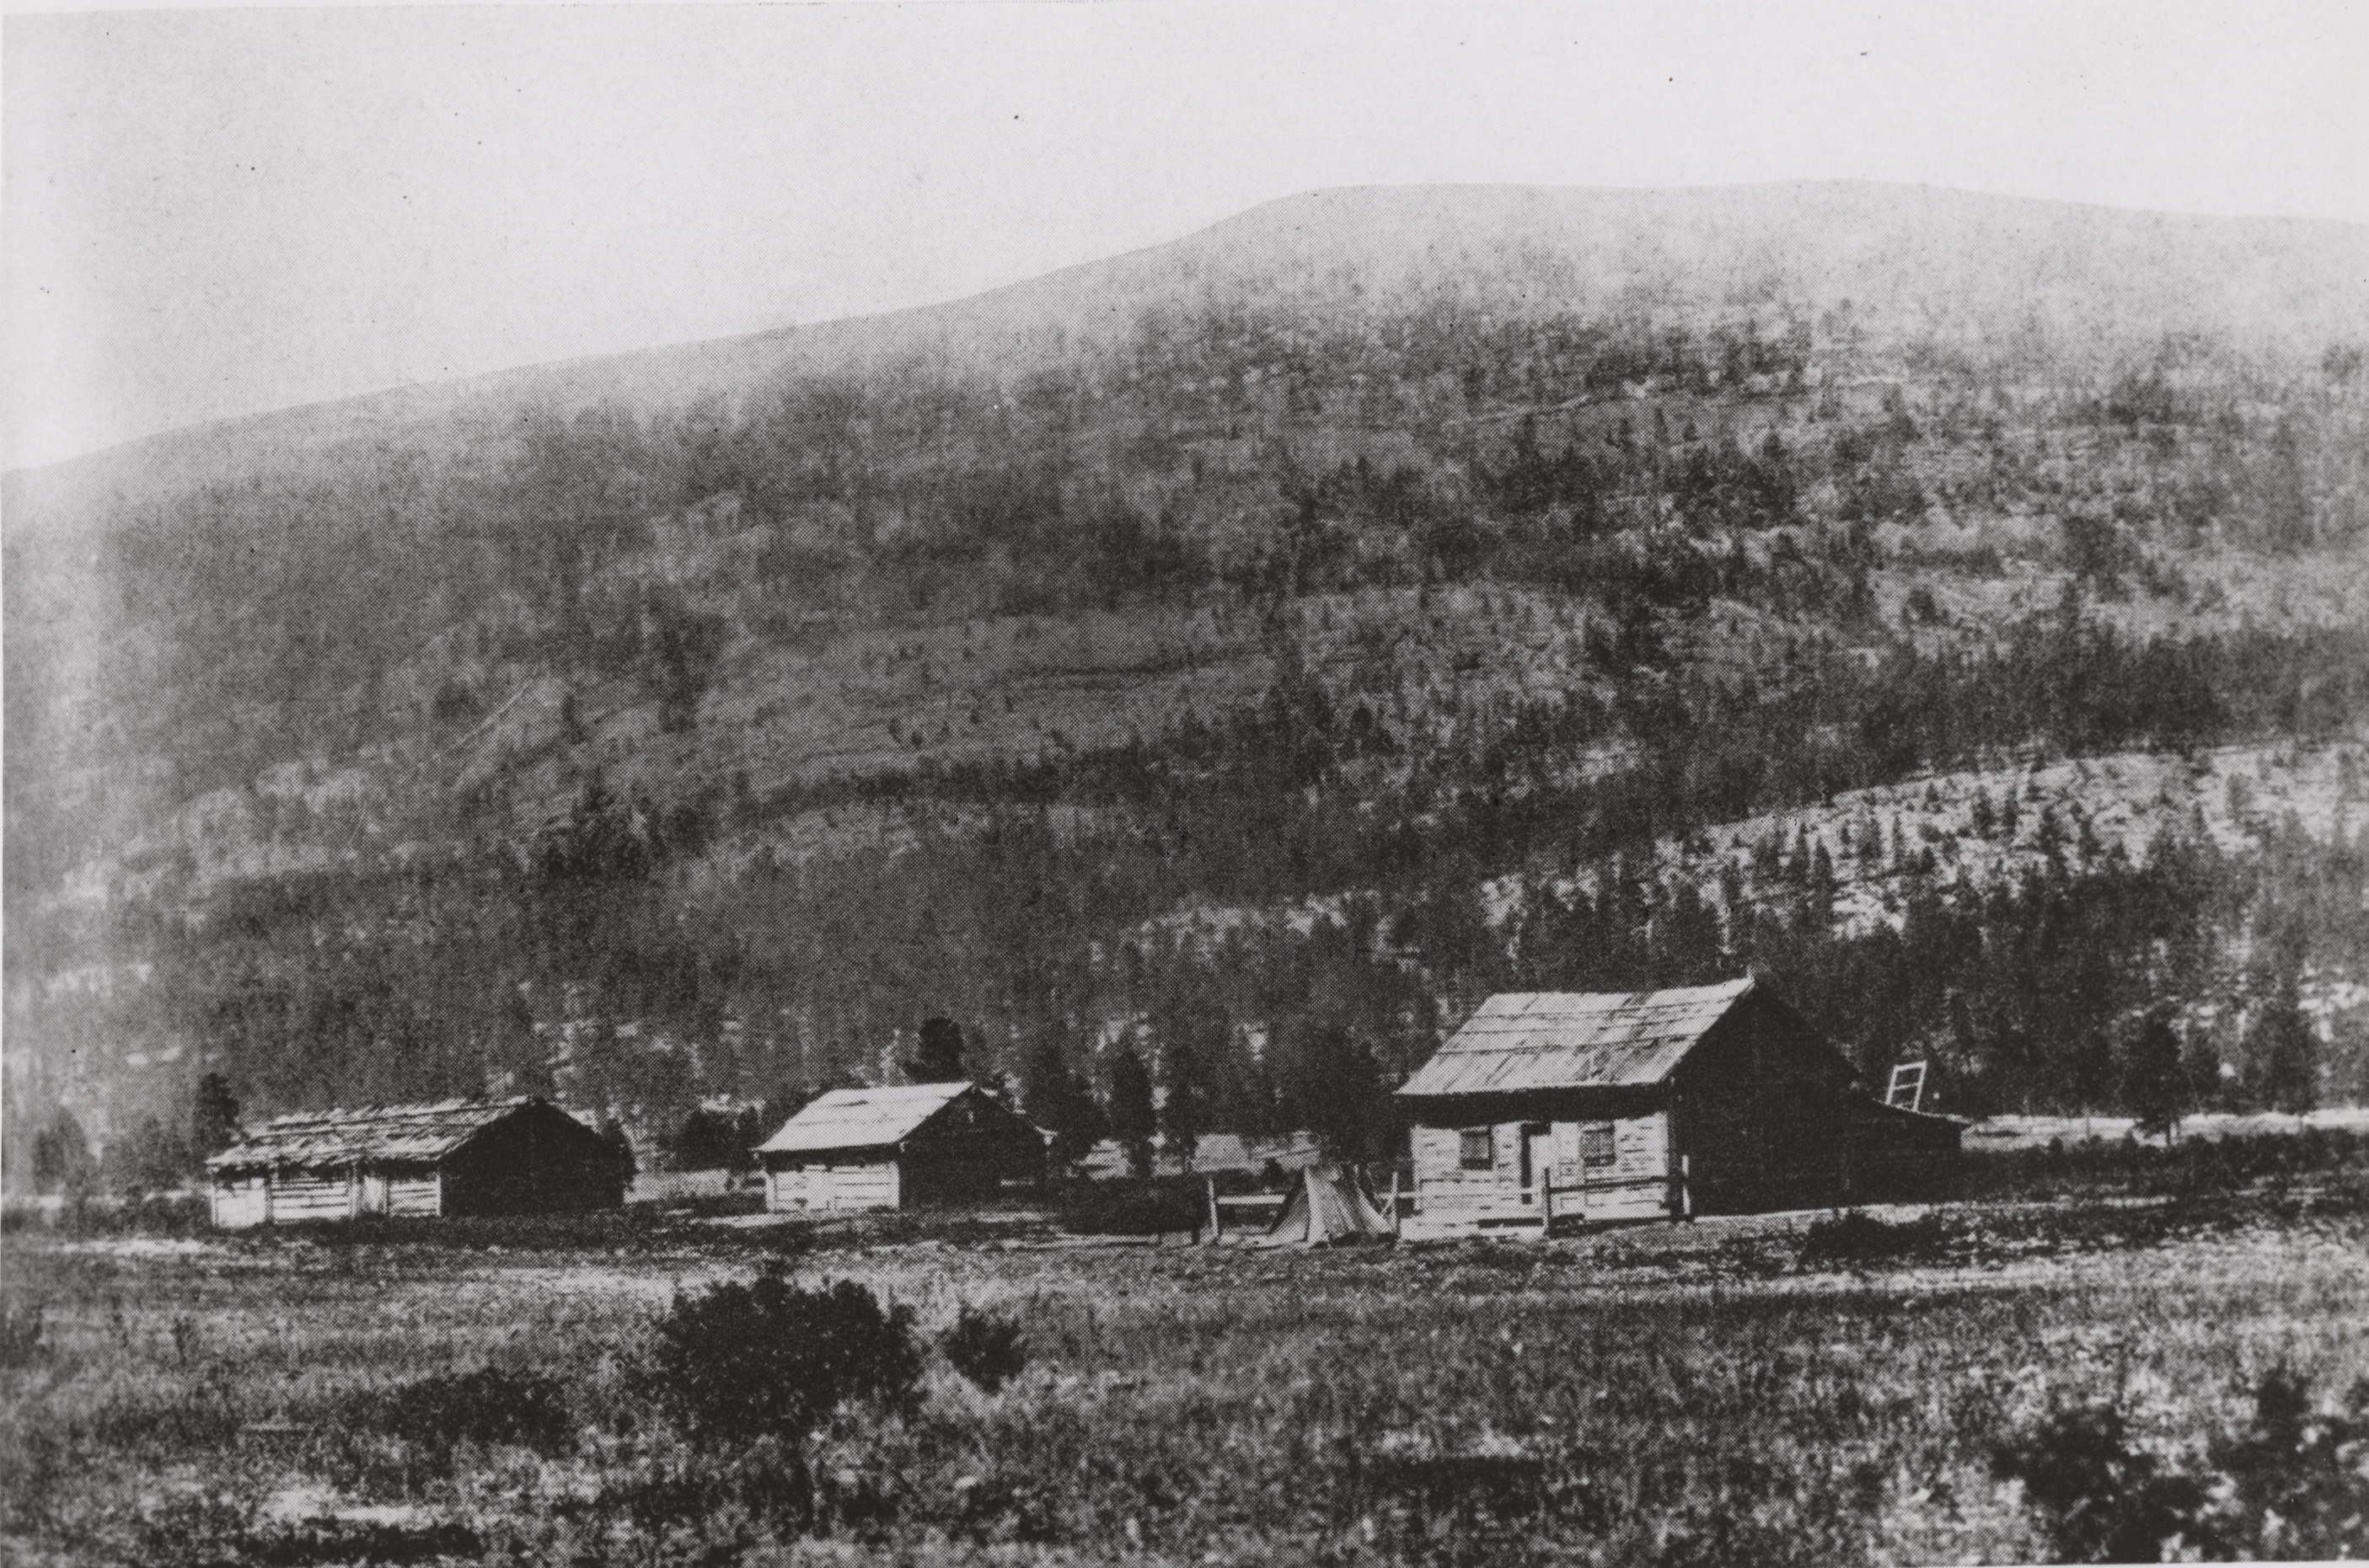 Black and white photograph of three wooden buildings at the base of a forested hill